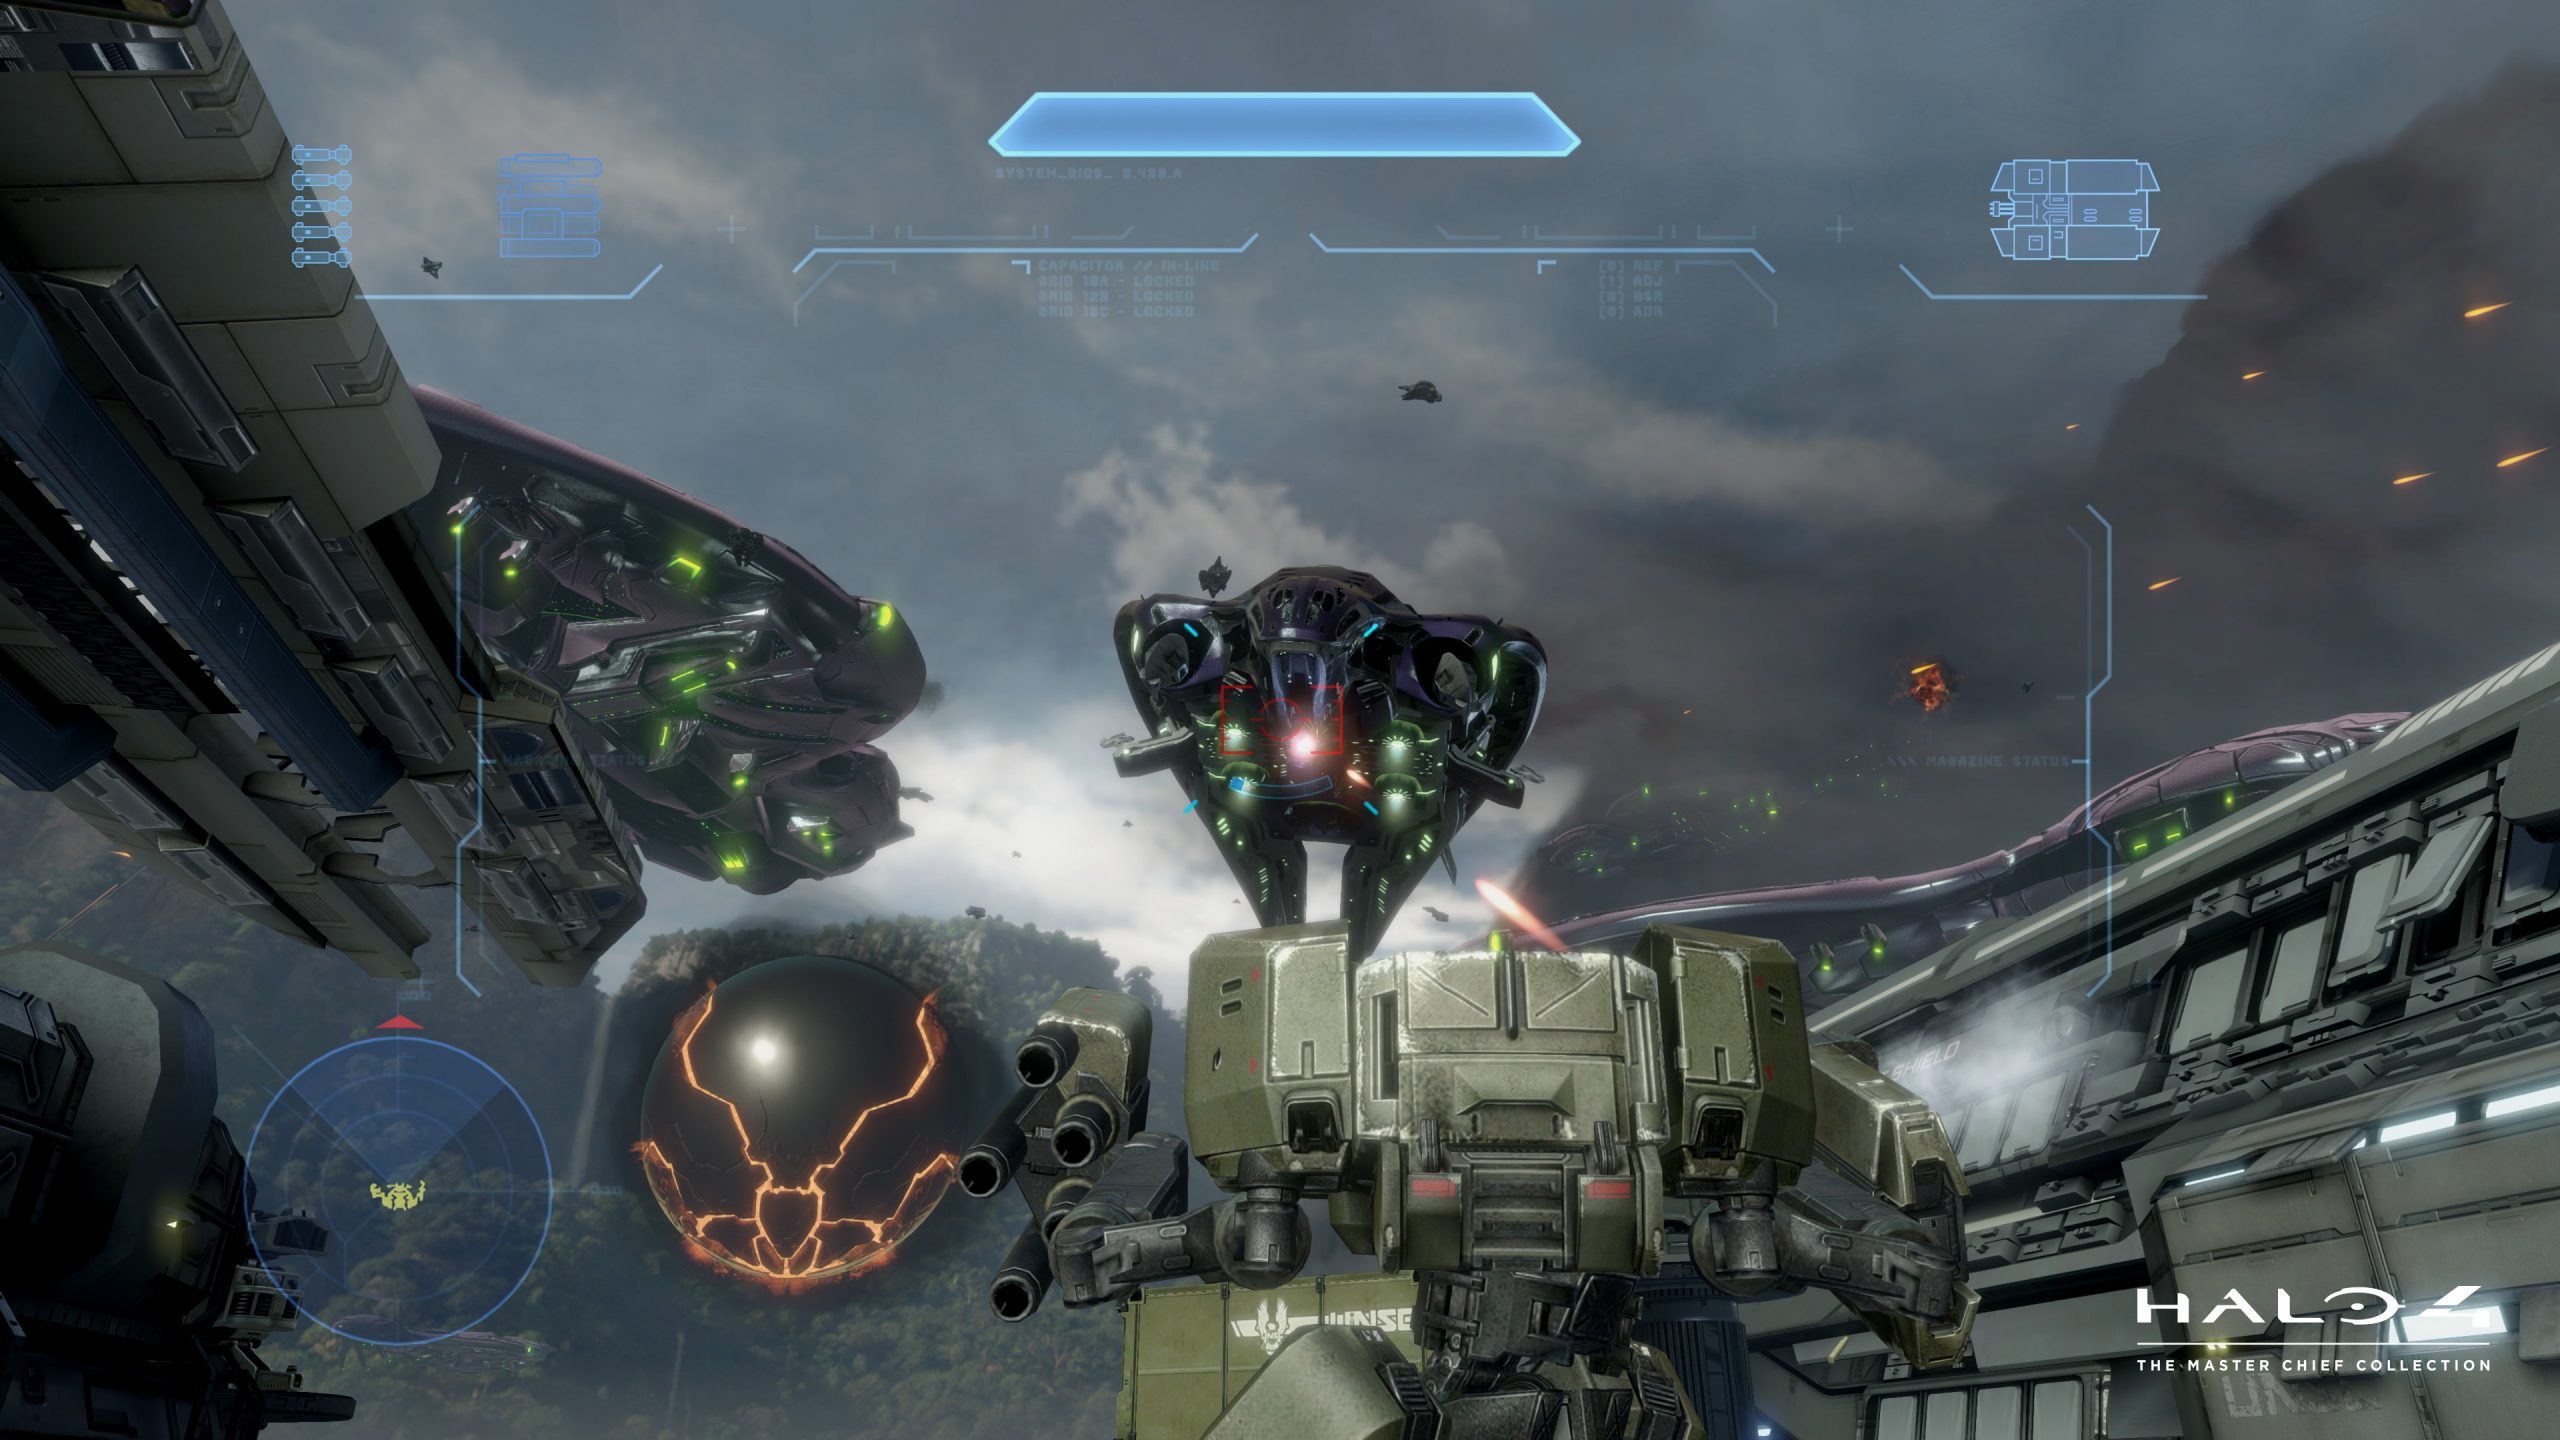 Halo 4 PC  Halo: The Master Chief Collection 